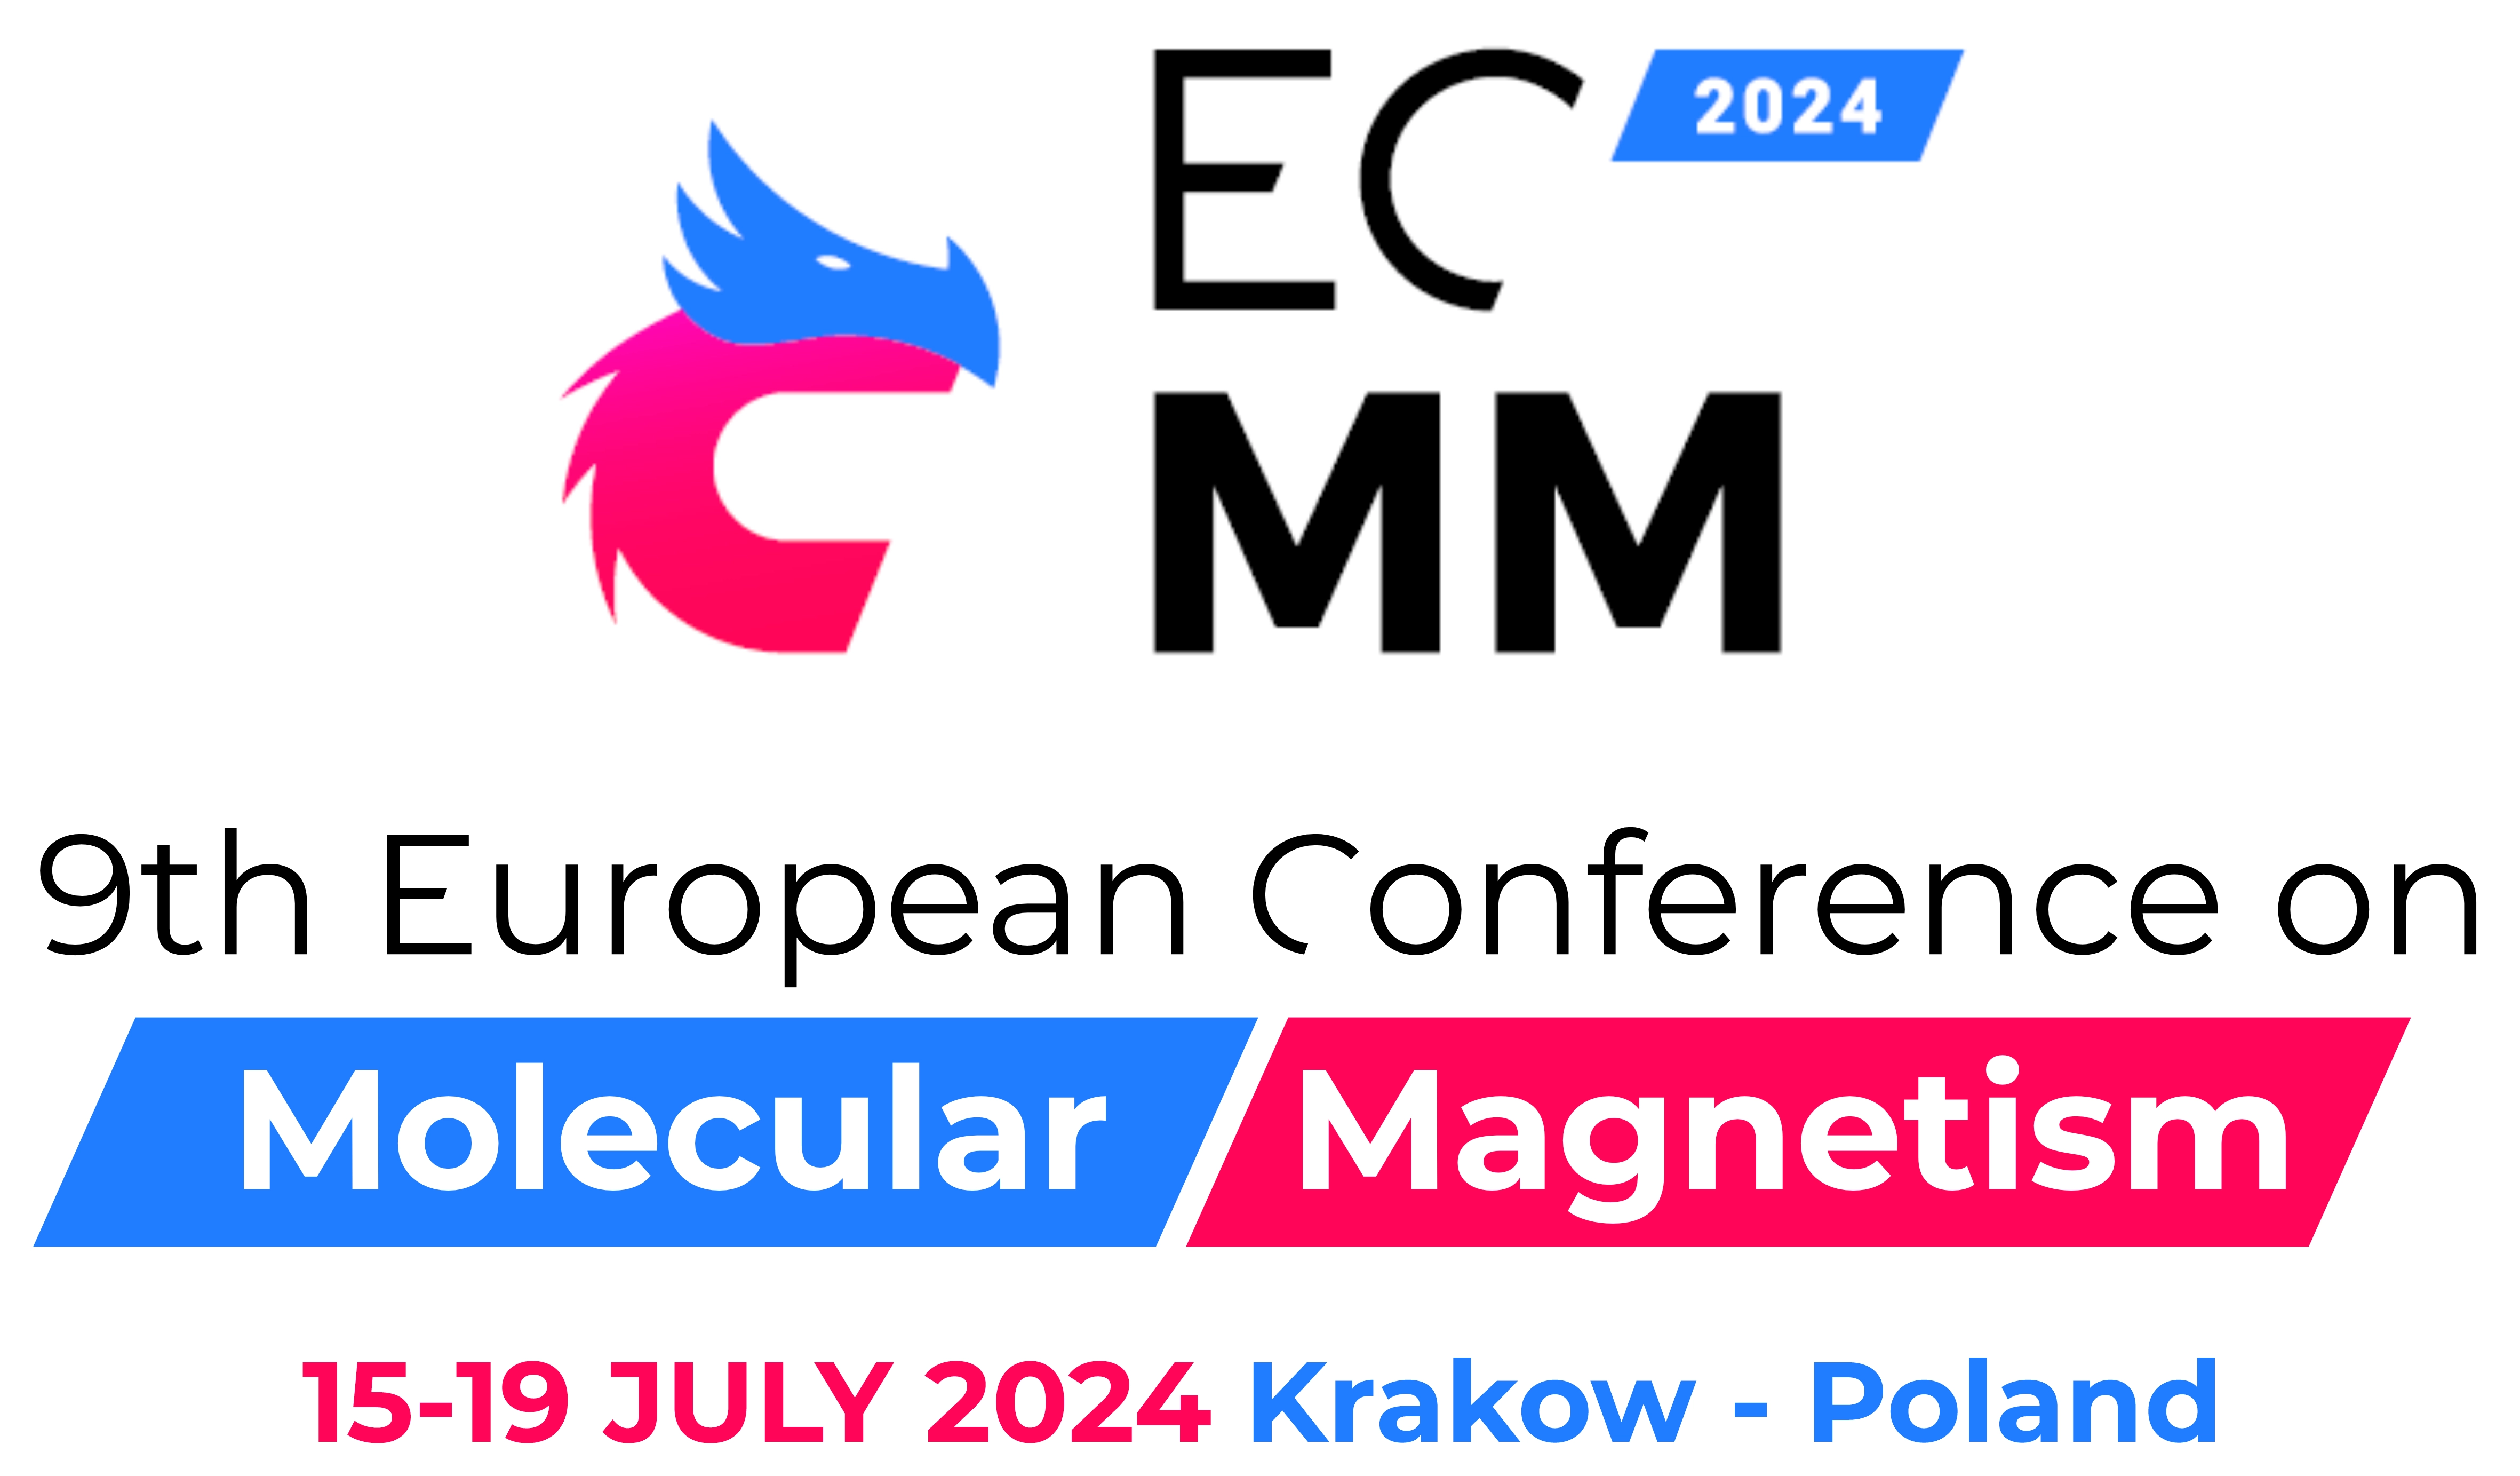 Information banner prepared for the ECMM 2024 conference taking place from July 15th to 19th. The banner presents the conference logo, which shows the head of the Wawel dragon in the shape of a horseshoe magnet as a reference to magnetism.